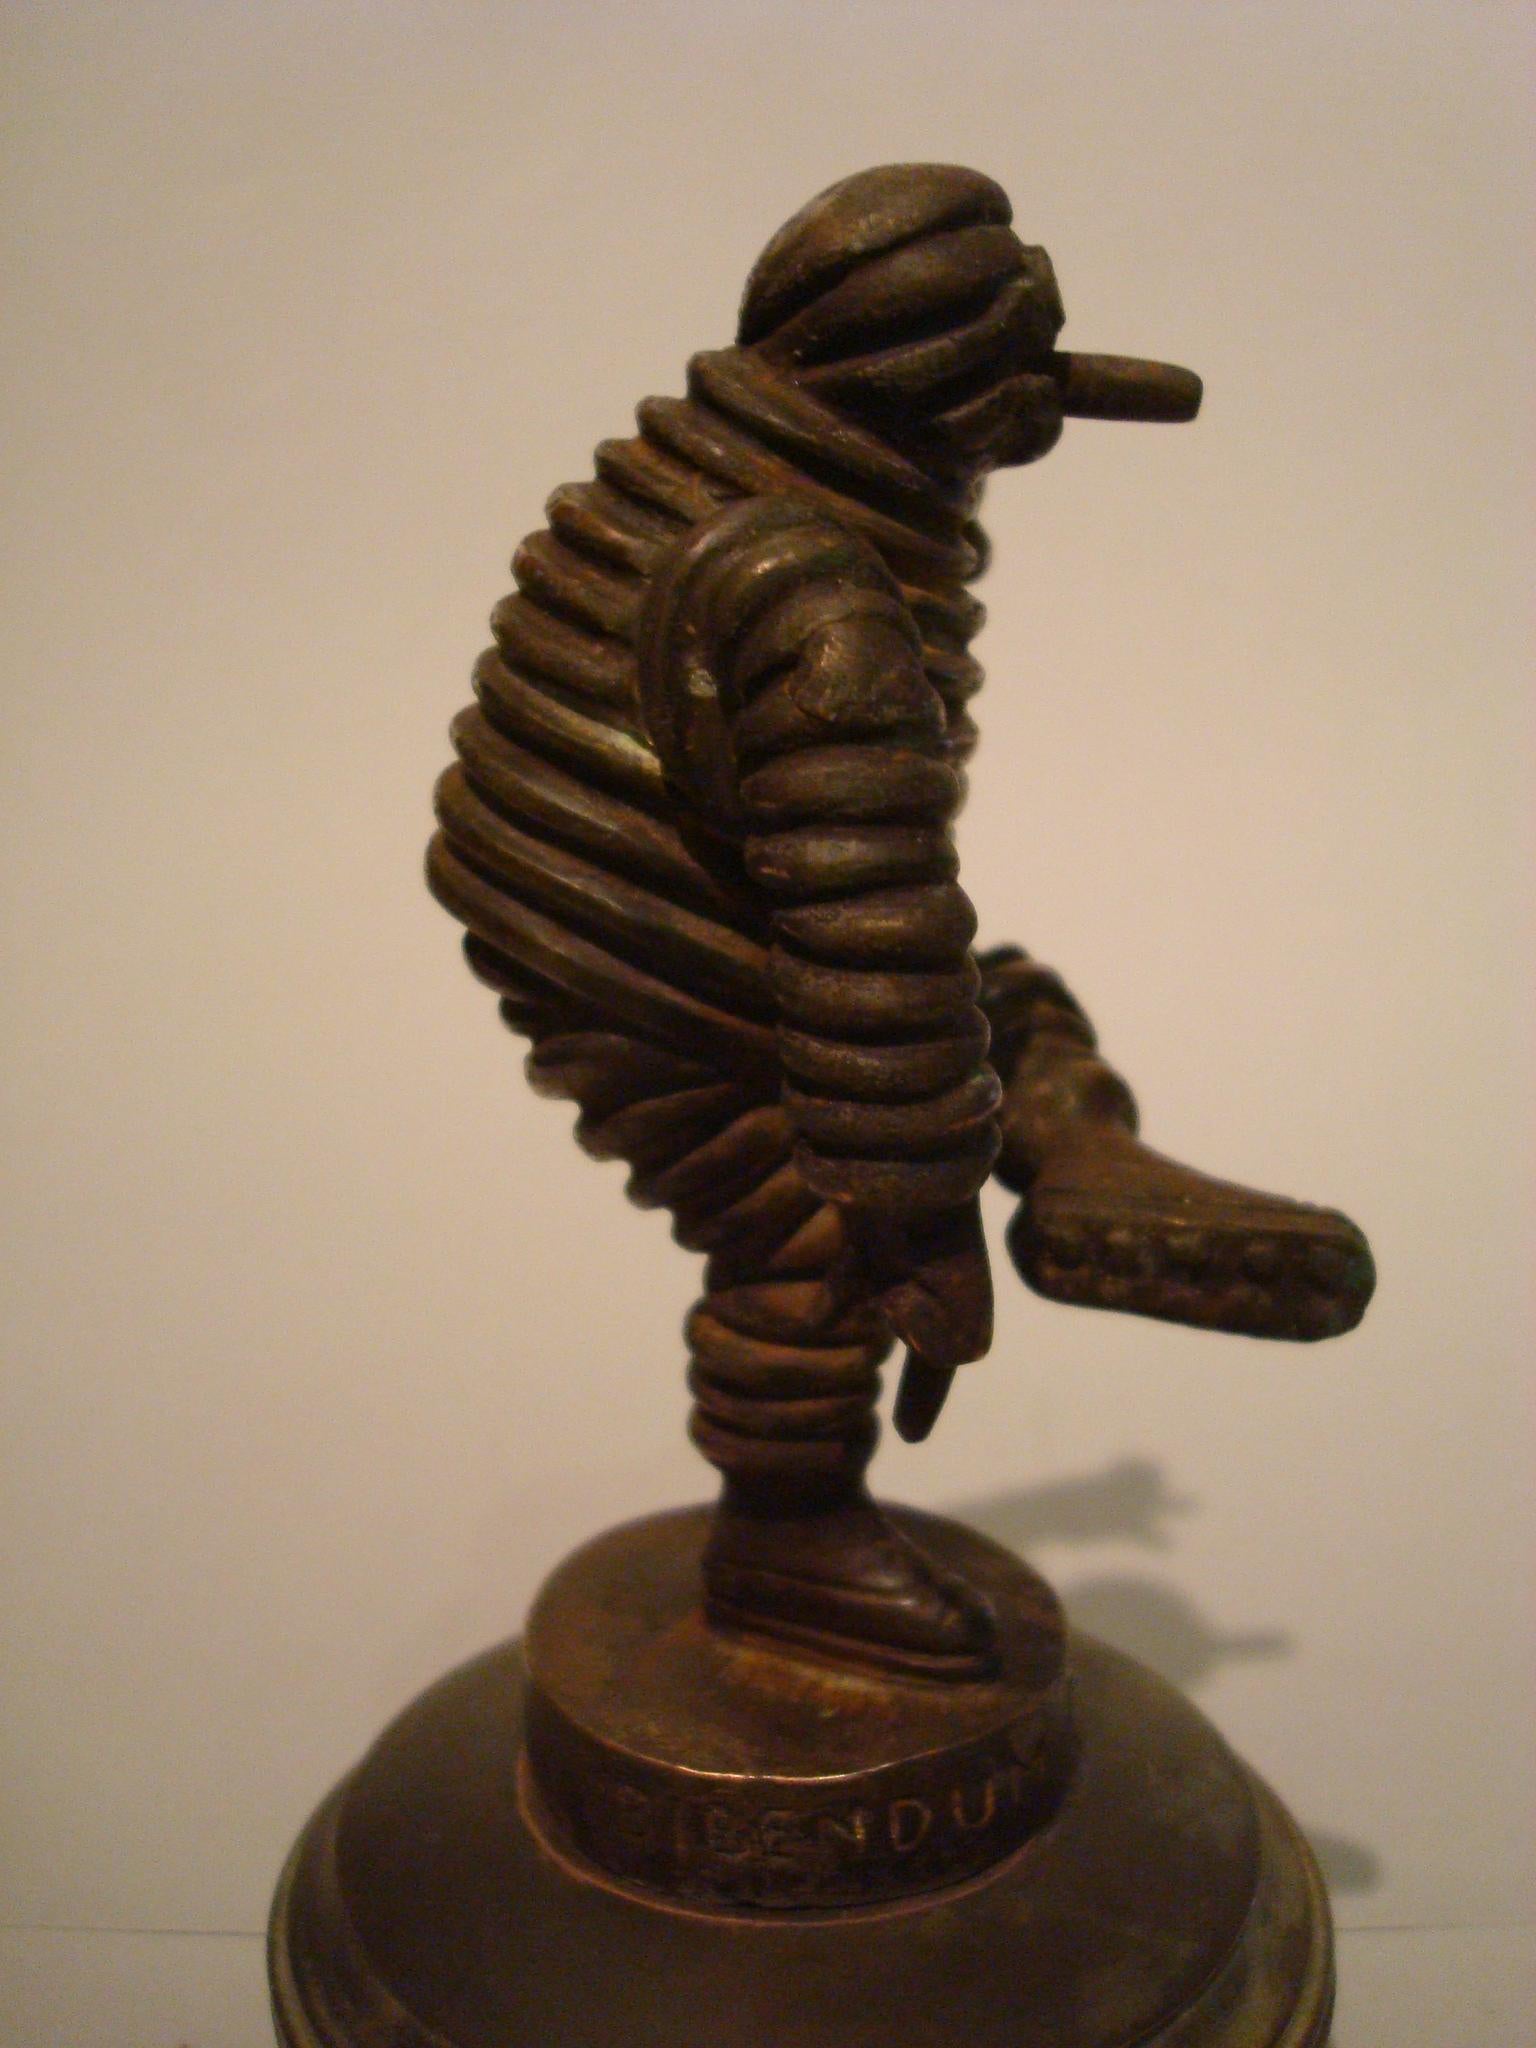 This is a highly collectible Bibendum Michelin Man bronze car mascot, Hood Ornament, Mascotte voiture.
It´s approximate 4 inch tall depiction of the Michelin man, also known as Bibendum, joyfully raises his arm while jauntily kicking up his leg.